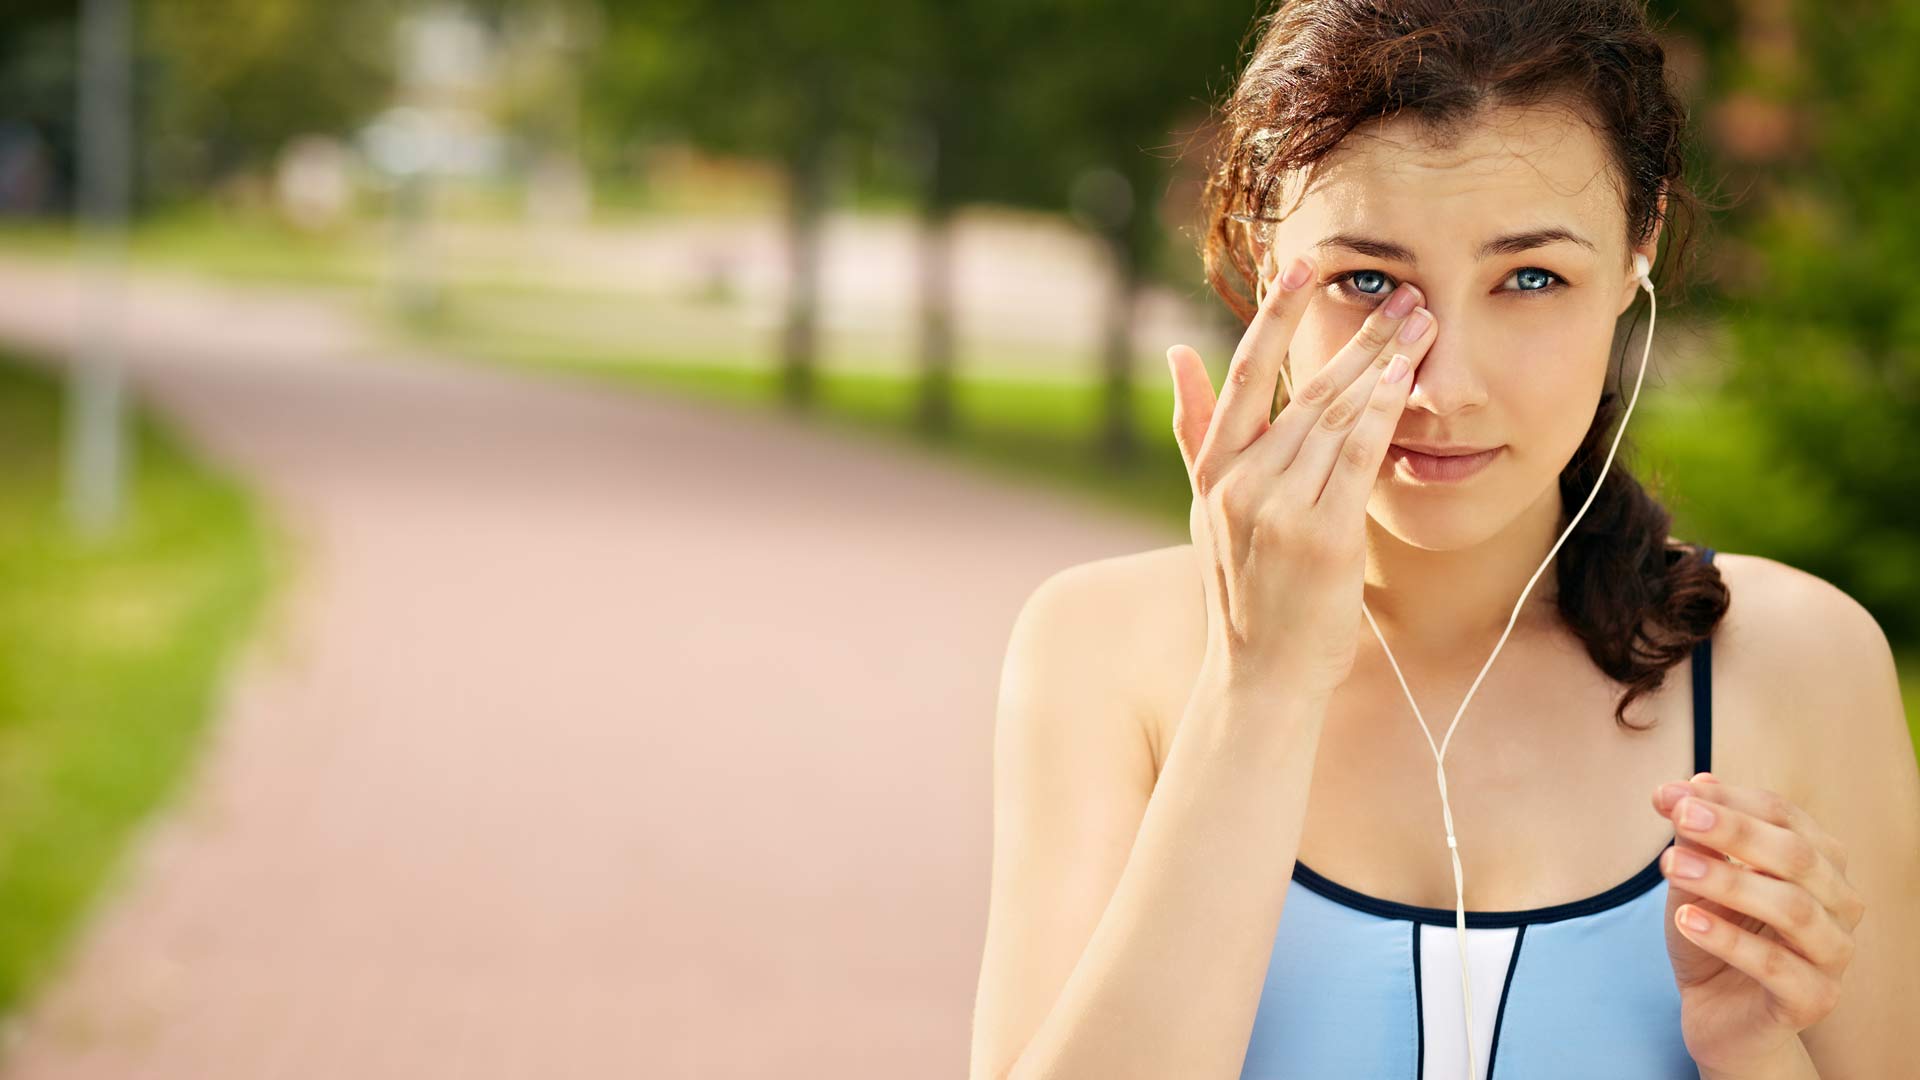 A woman touching her eye while exercising. A woman touching her eye while exercising outside on a running trail